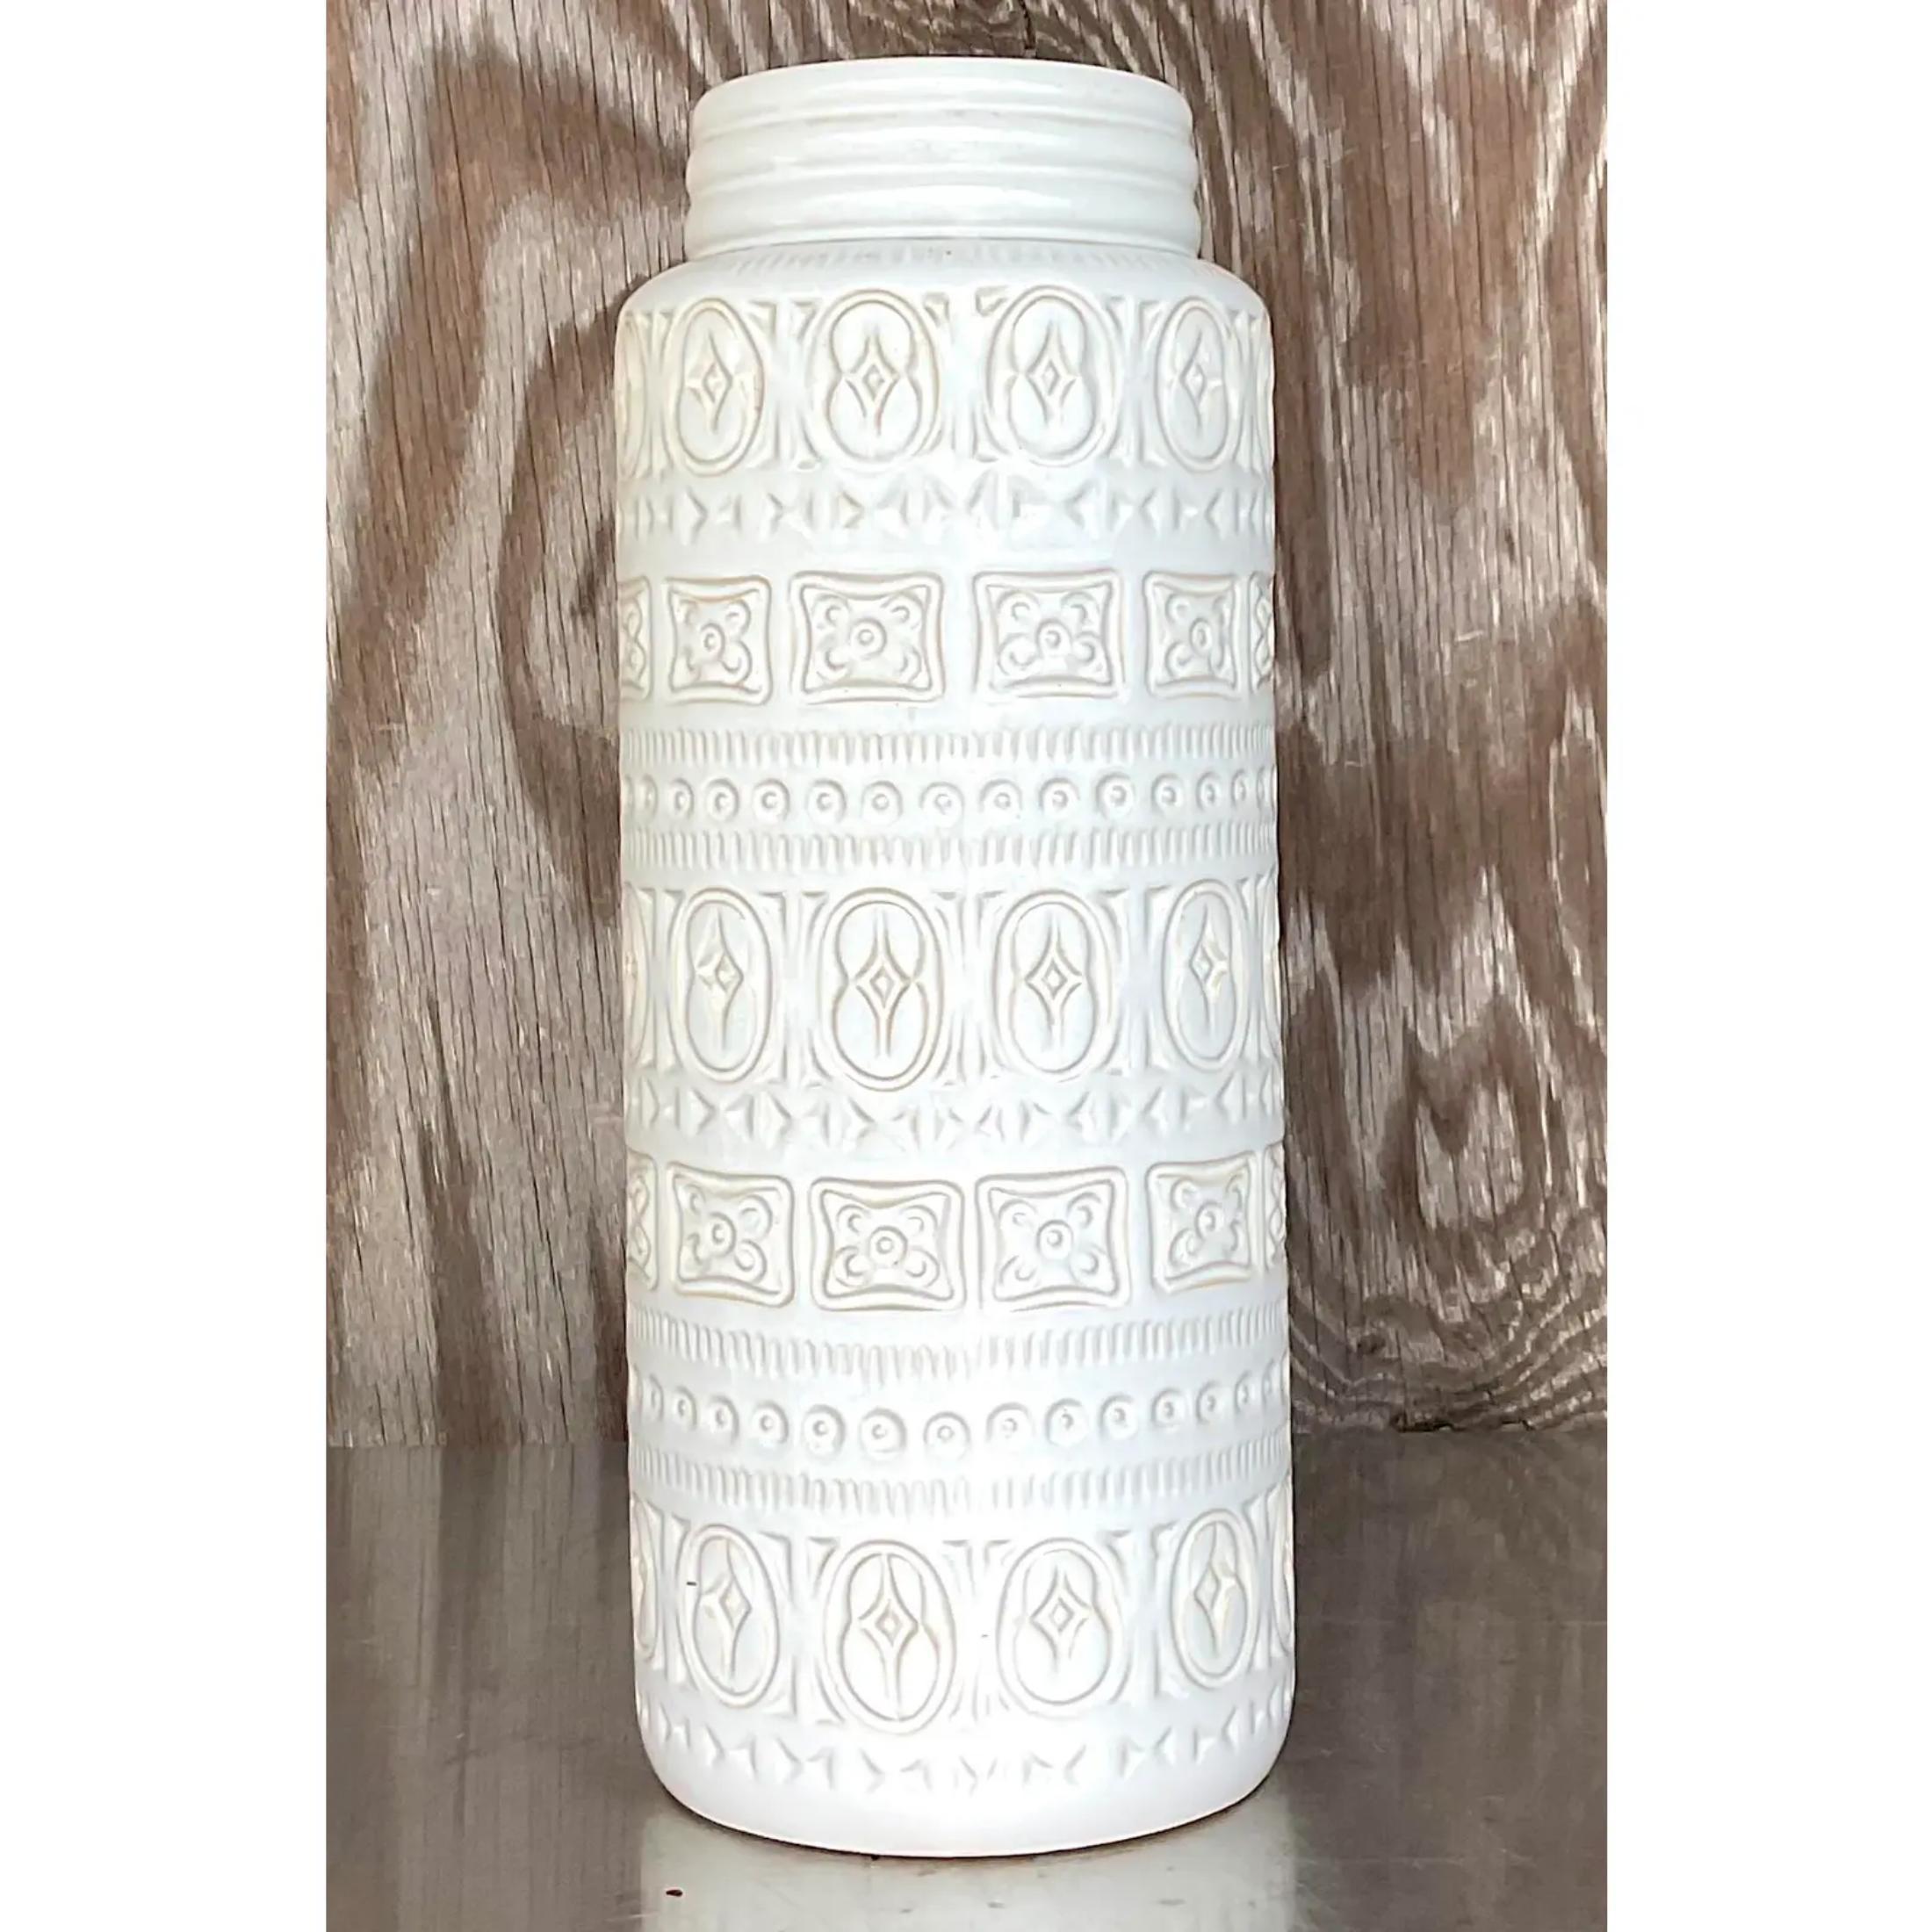 A fantastic vintage MCM table vase. An iconic West German design with a repeating ring of design characters. A beautiful neutral color that will blend easily into so many looks. Marked on the bottom. Acquired from a Palm Beach estate